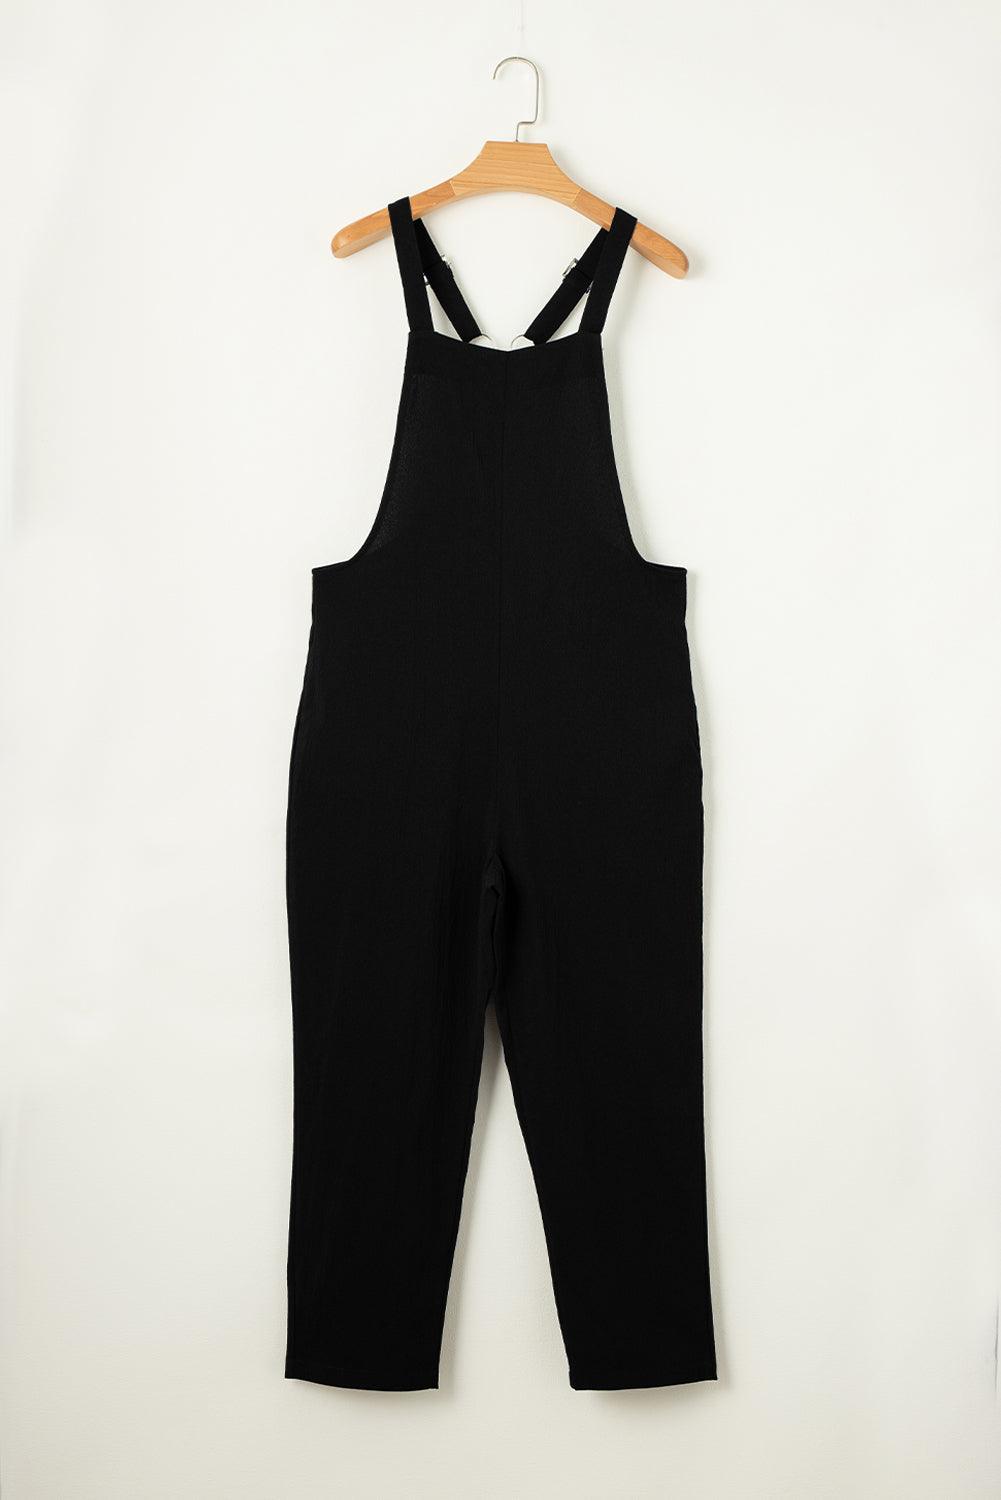 Black Adjustable Buckle Straps Cropped Casual Overalls Jumpsuit